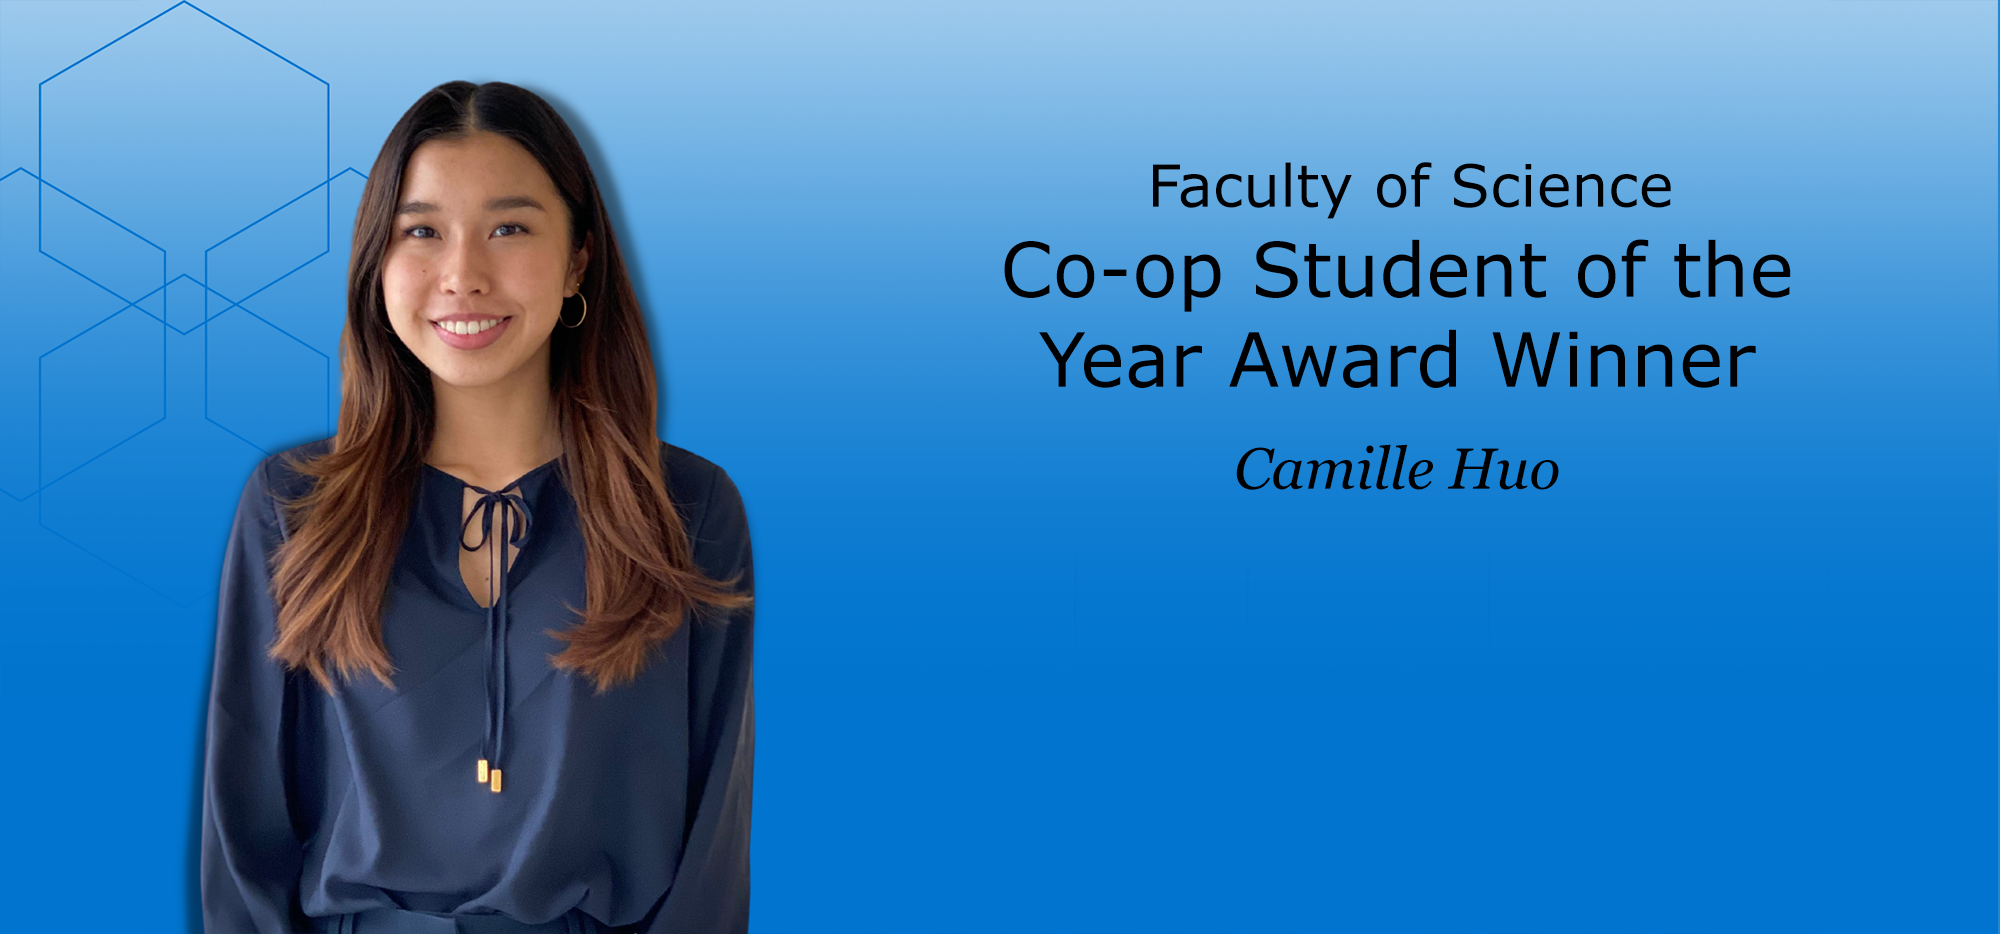 Faculty of Science Co-op Student of the  Year Award Winner Camille Huo